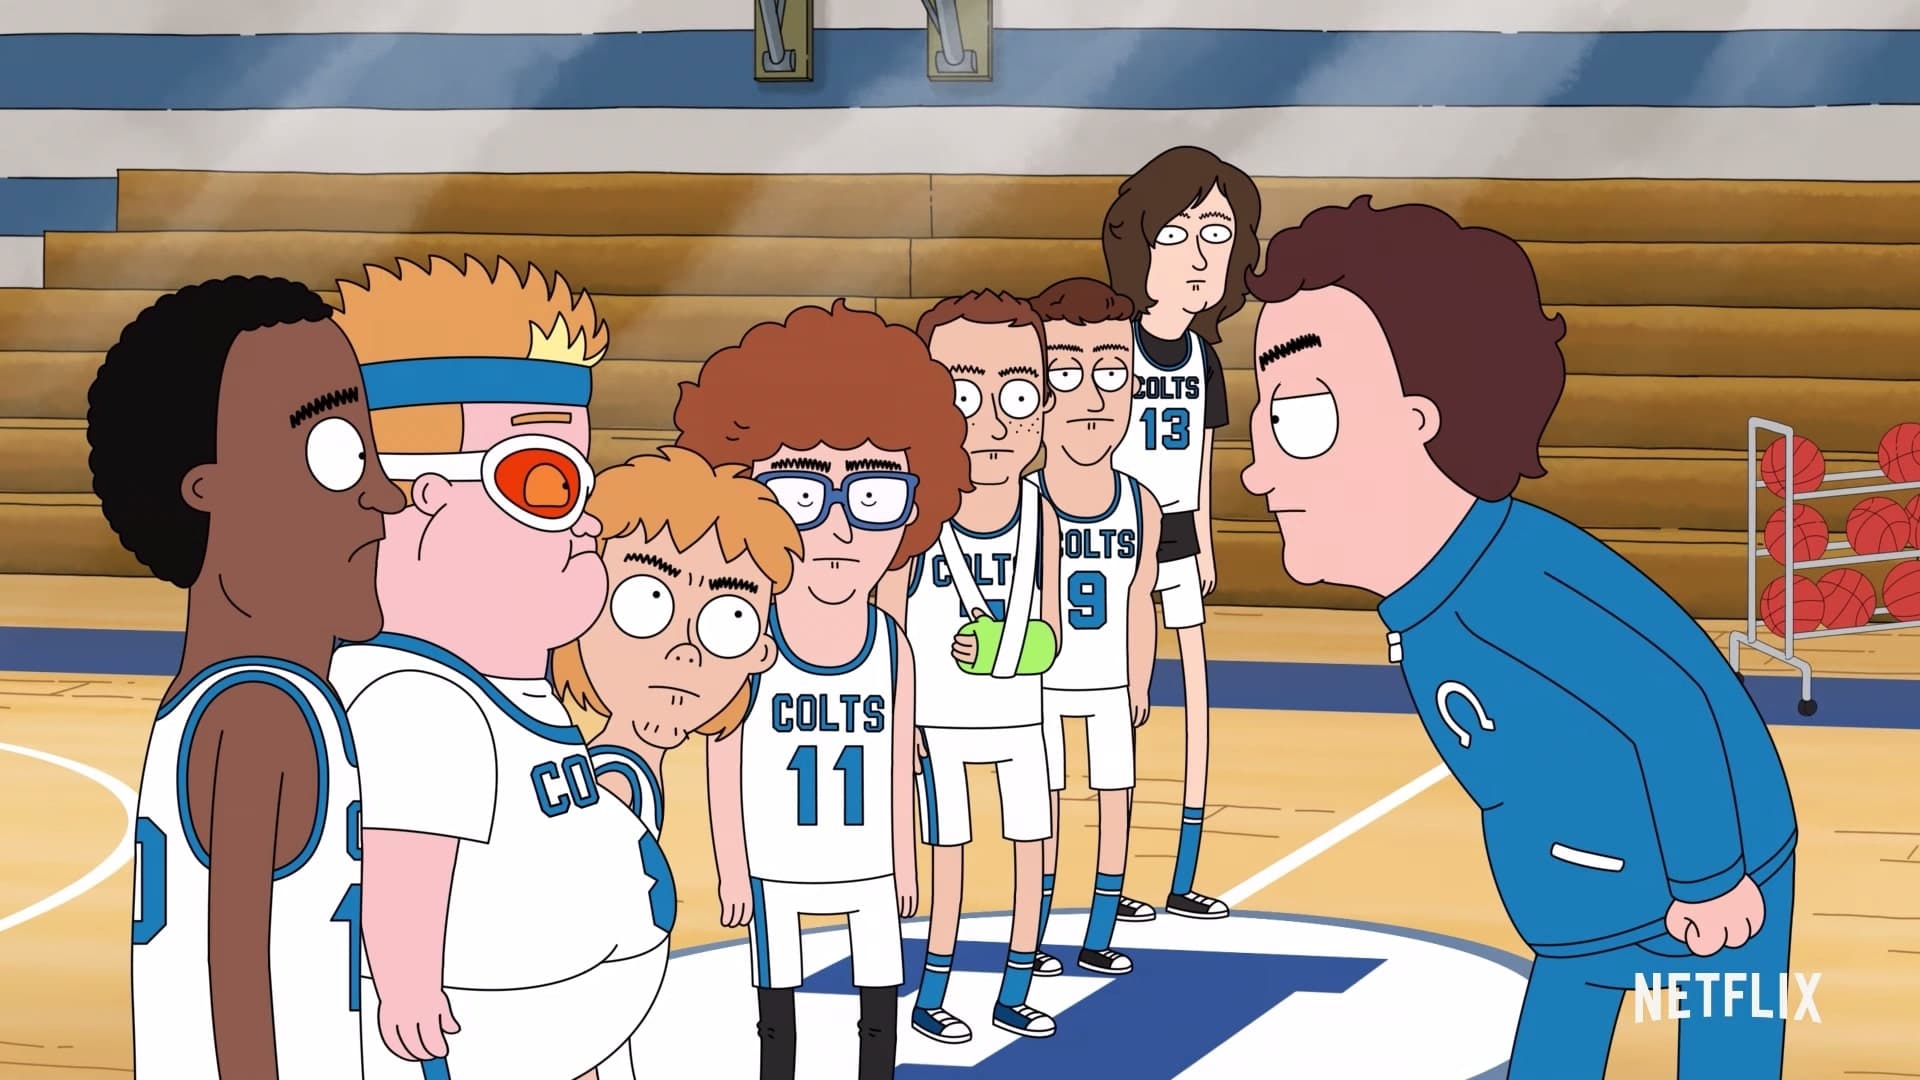 Netflix HOOPS Trailer, Netflix Animated Comedy, Netflix Comedy Series, Coming to Netflix in August 2020